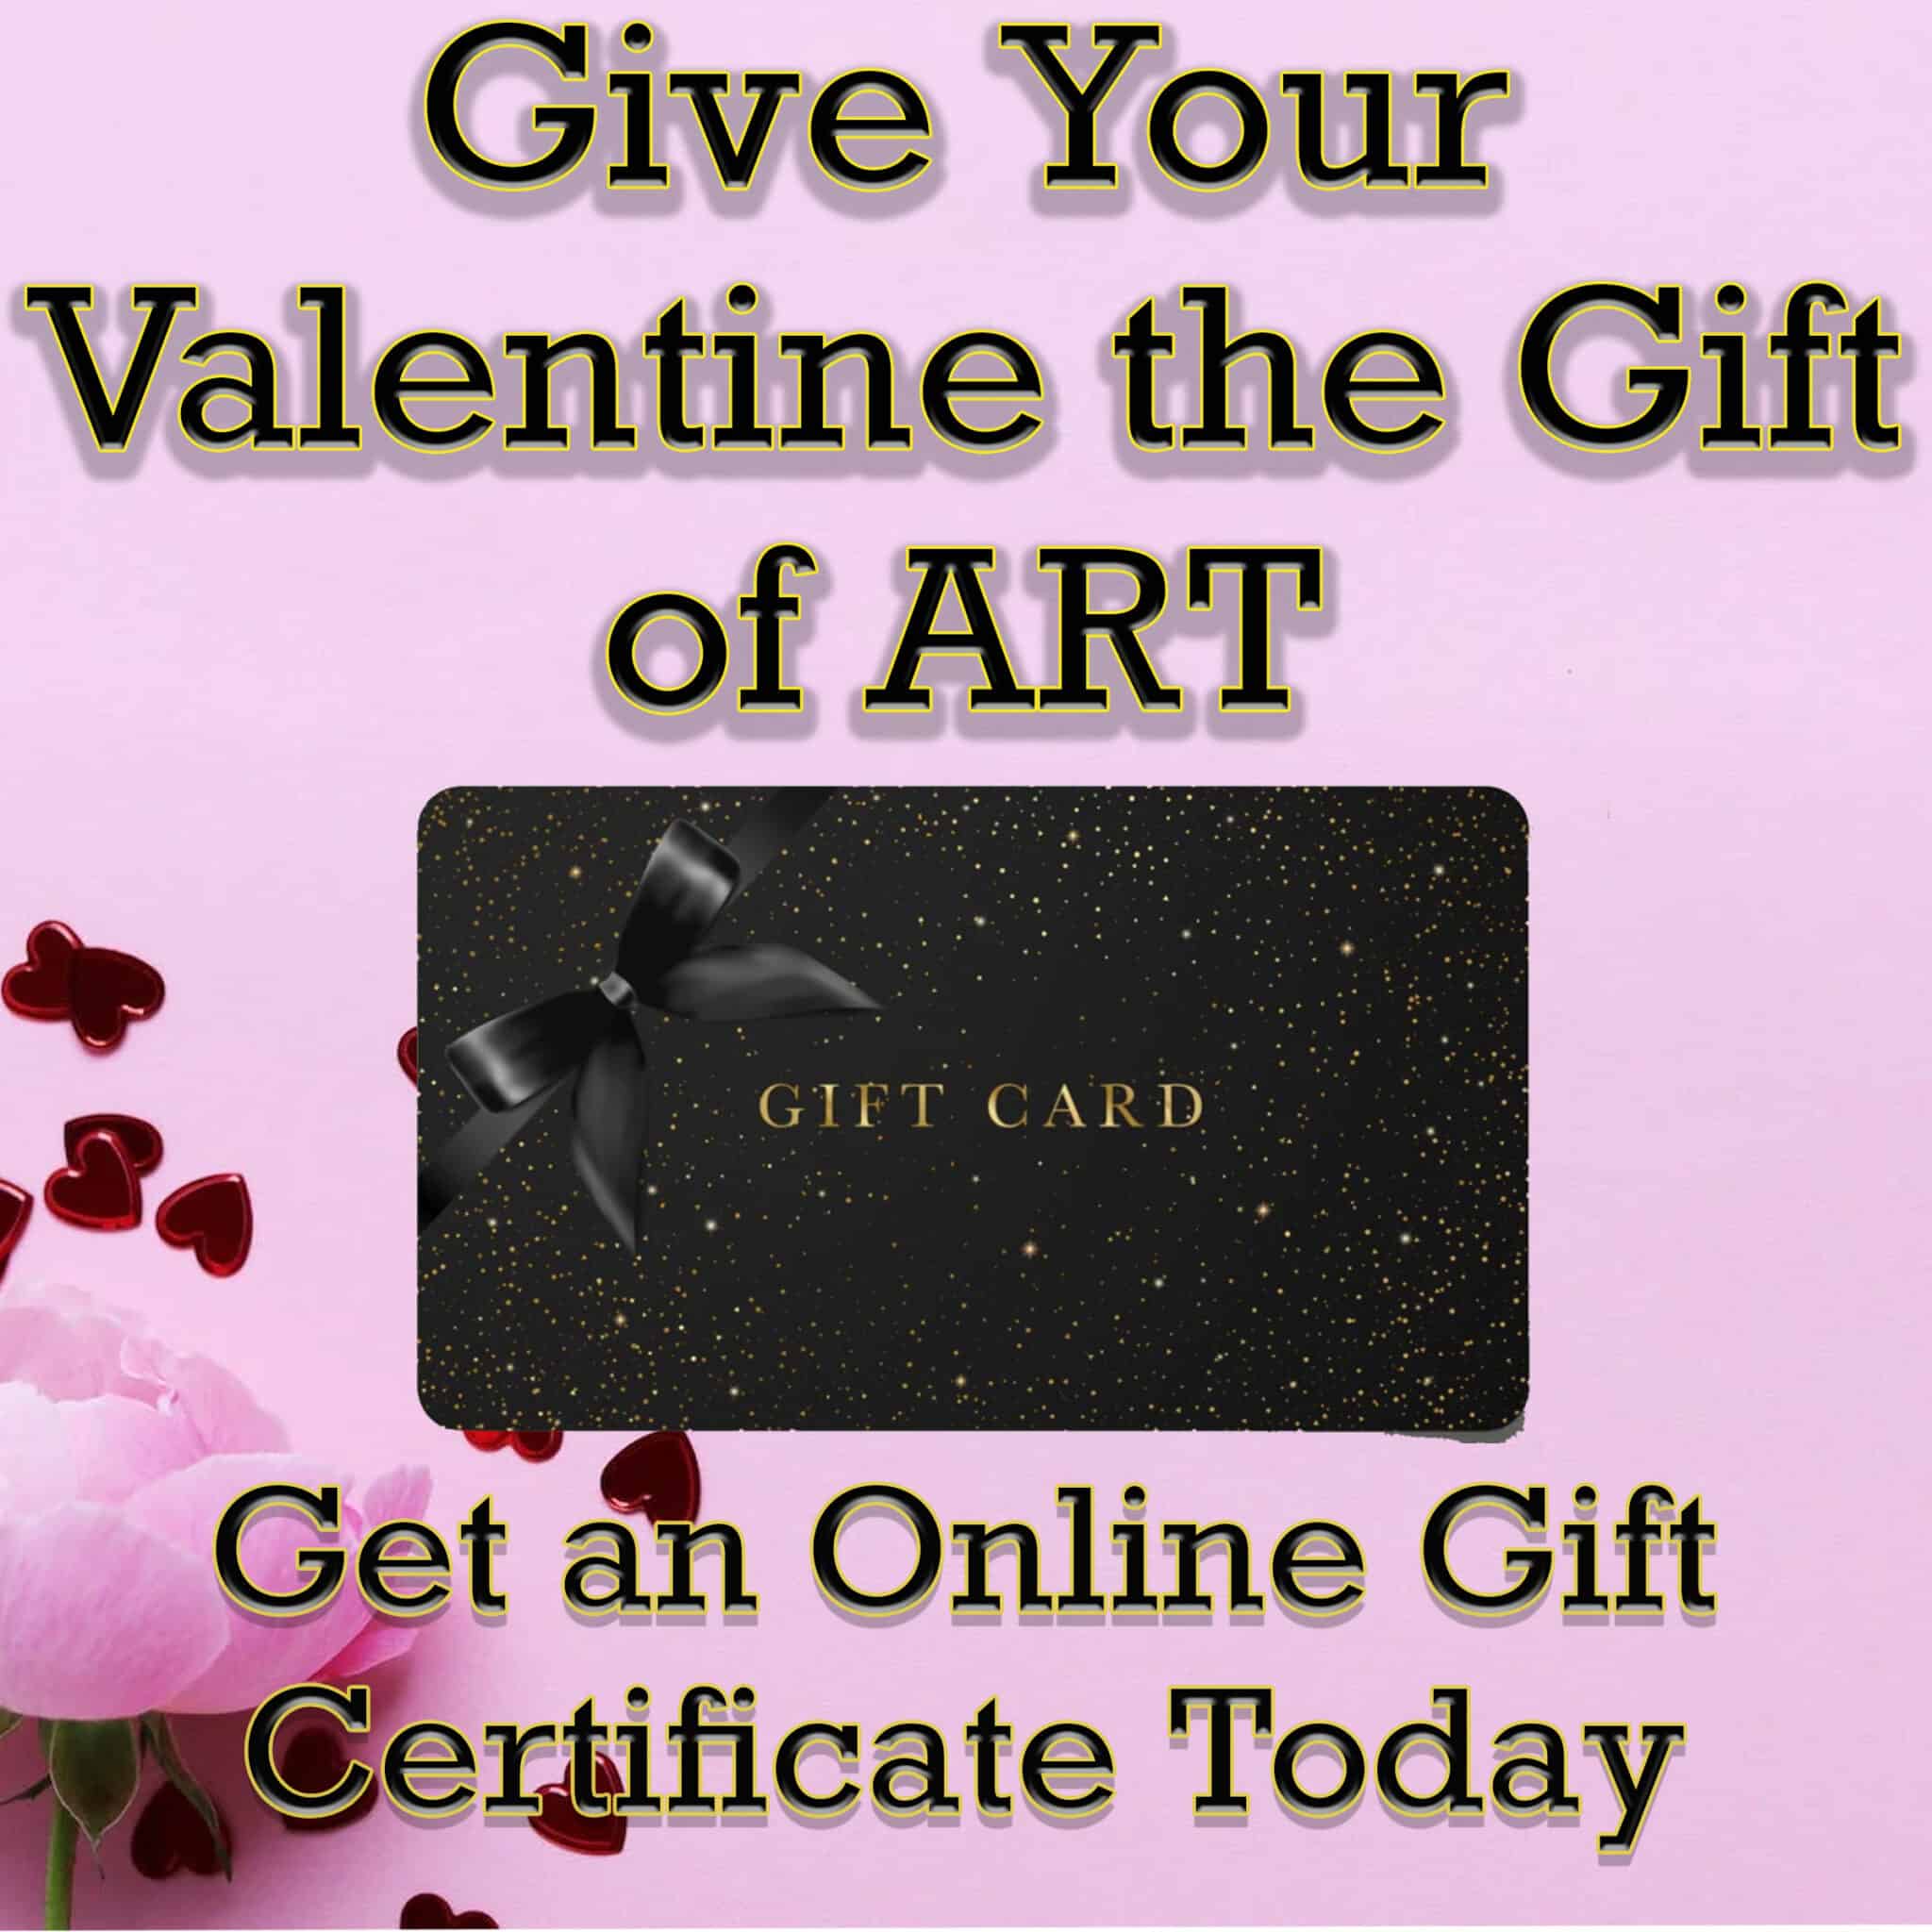 Gift your valentine the gift of art - Lucky Bamboo Tattoo